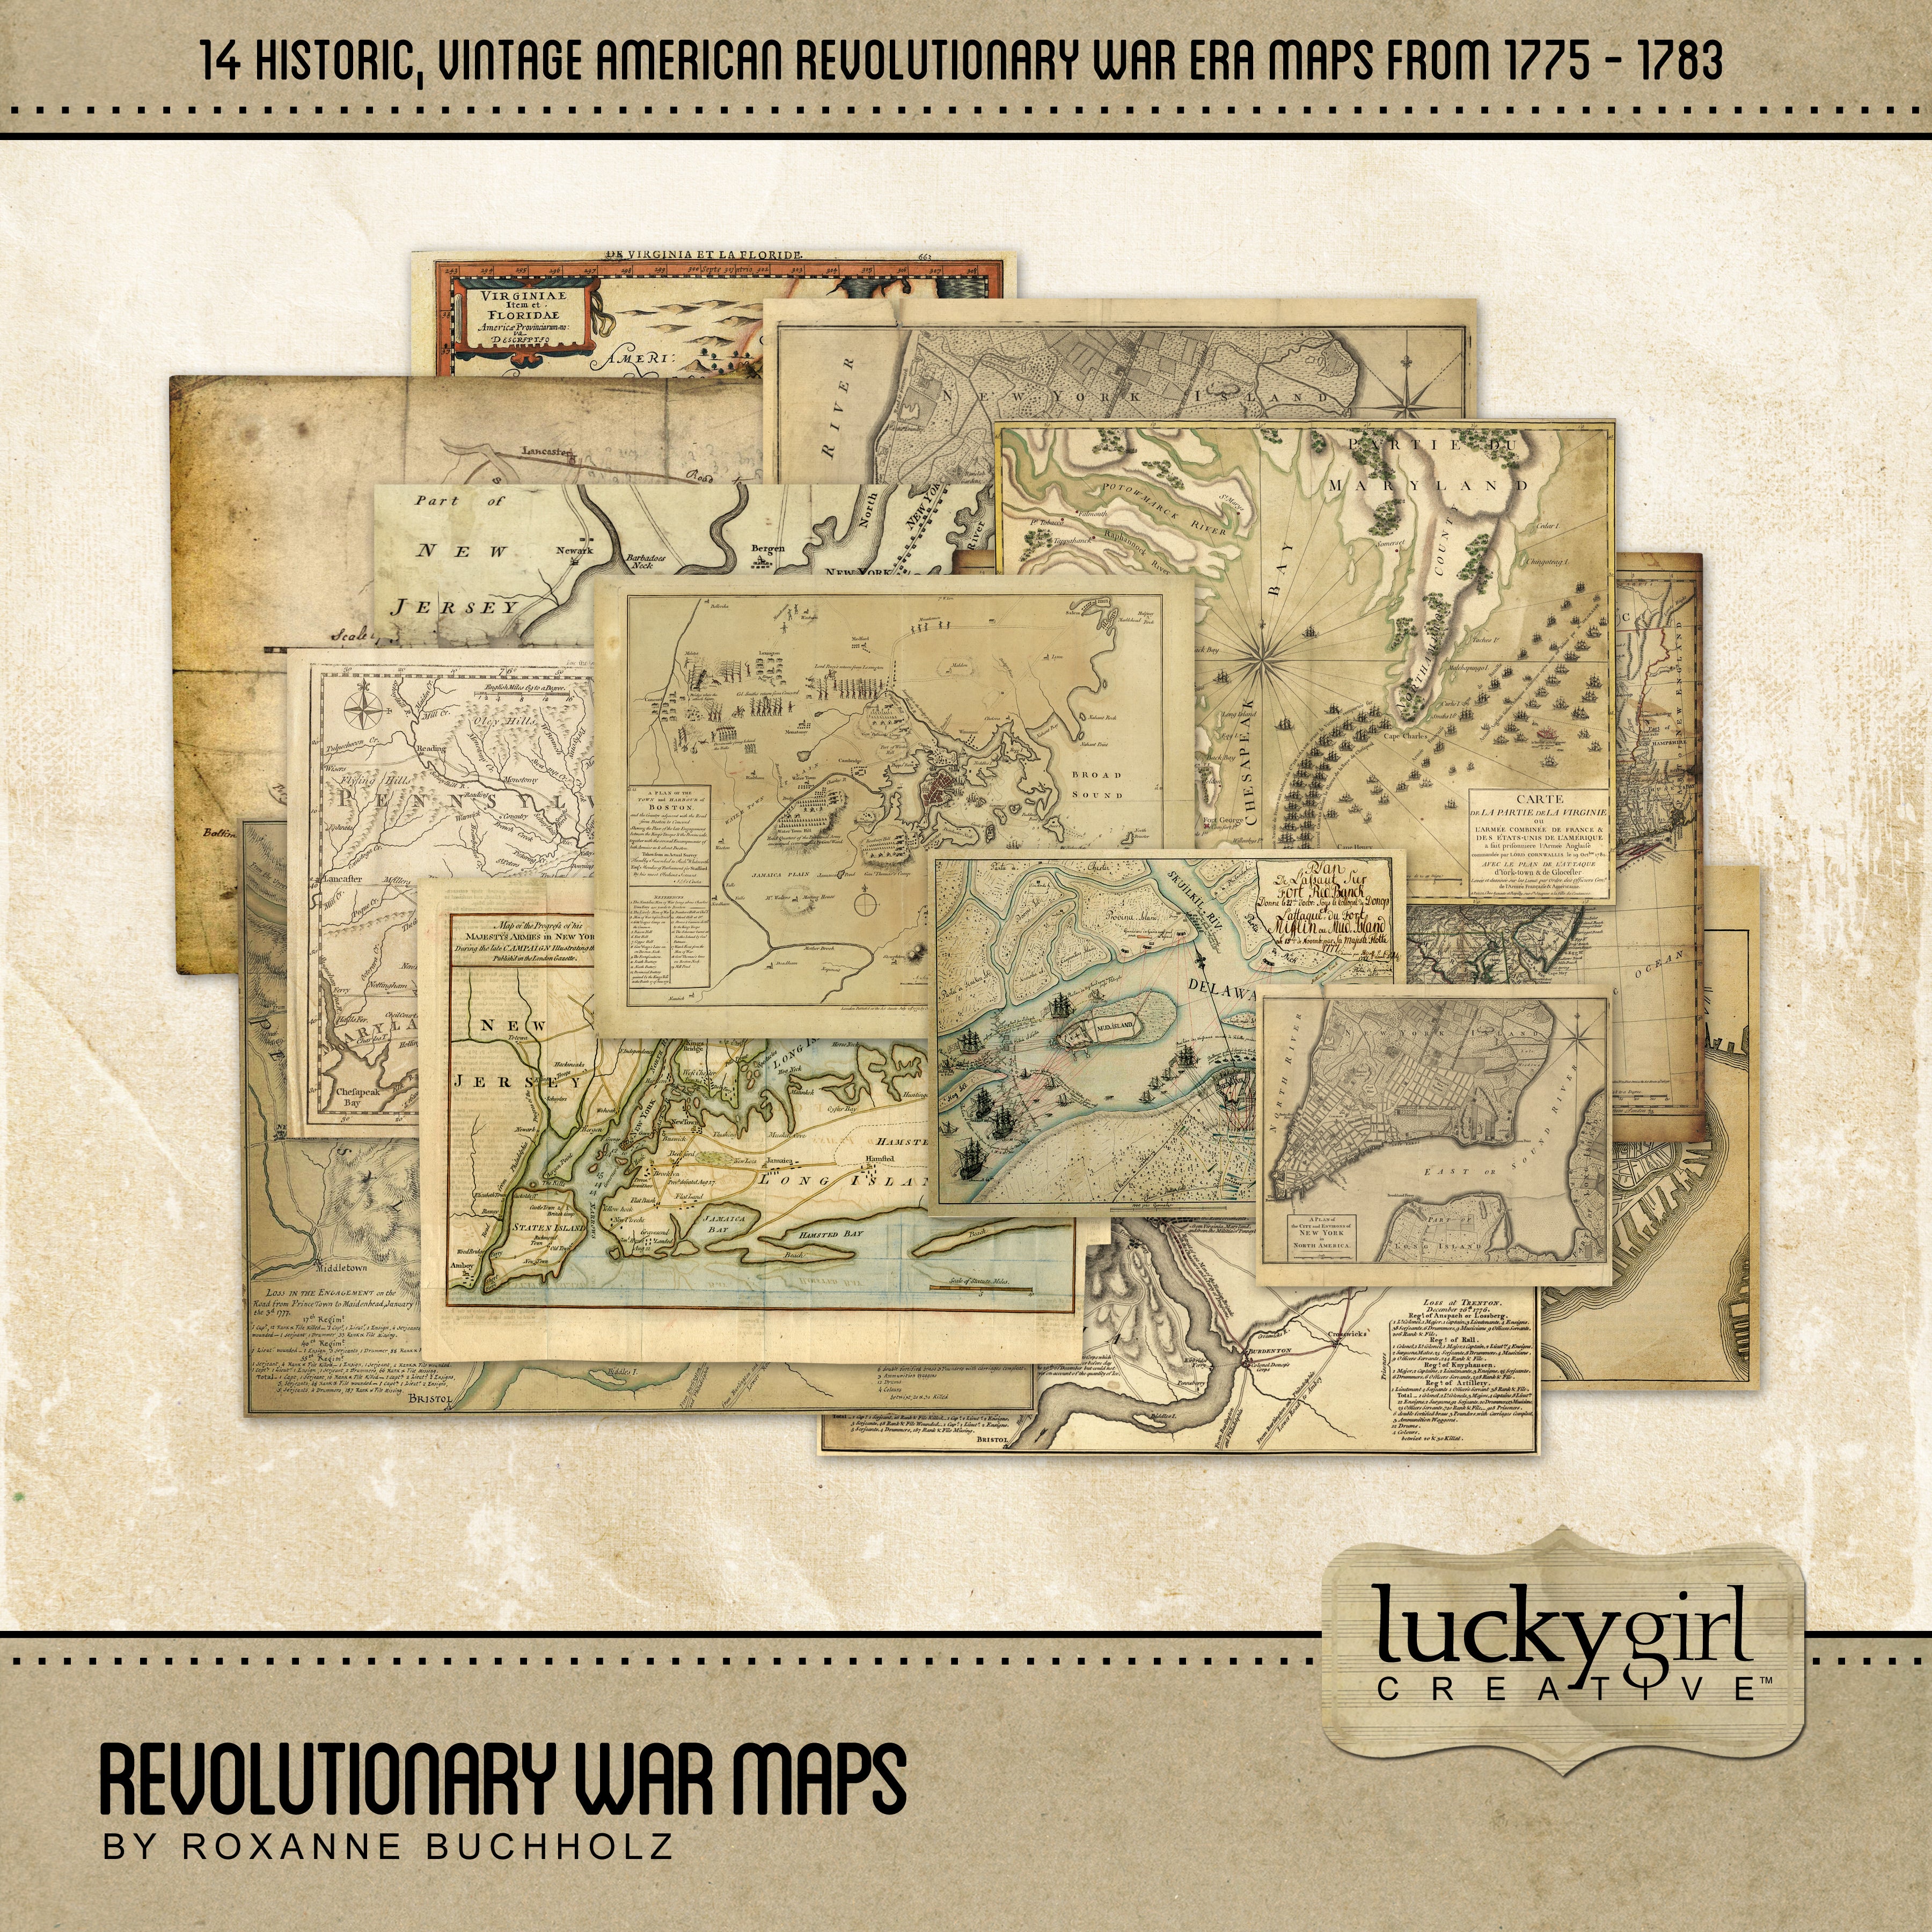 Extensively researched, this vintage American Revolutionary War Maps Digital Scrapbook Kit is great for family genealogy projects. It showcases 14 antique digital art maps and charts from around 1775 - 1783 when the 13 American colonies fought Great Britain for their freedom.